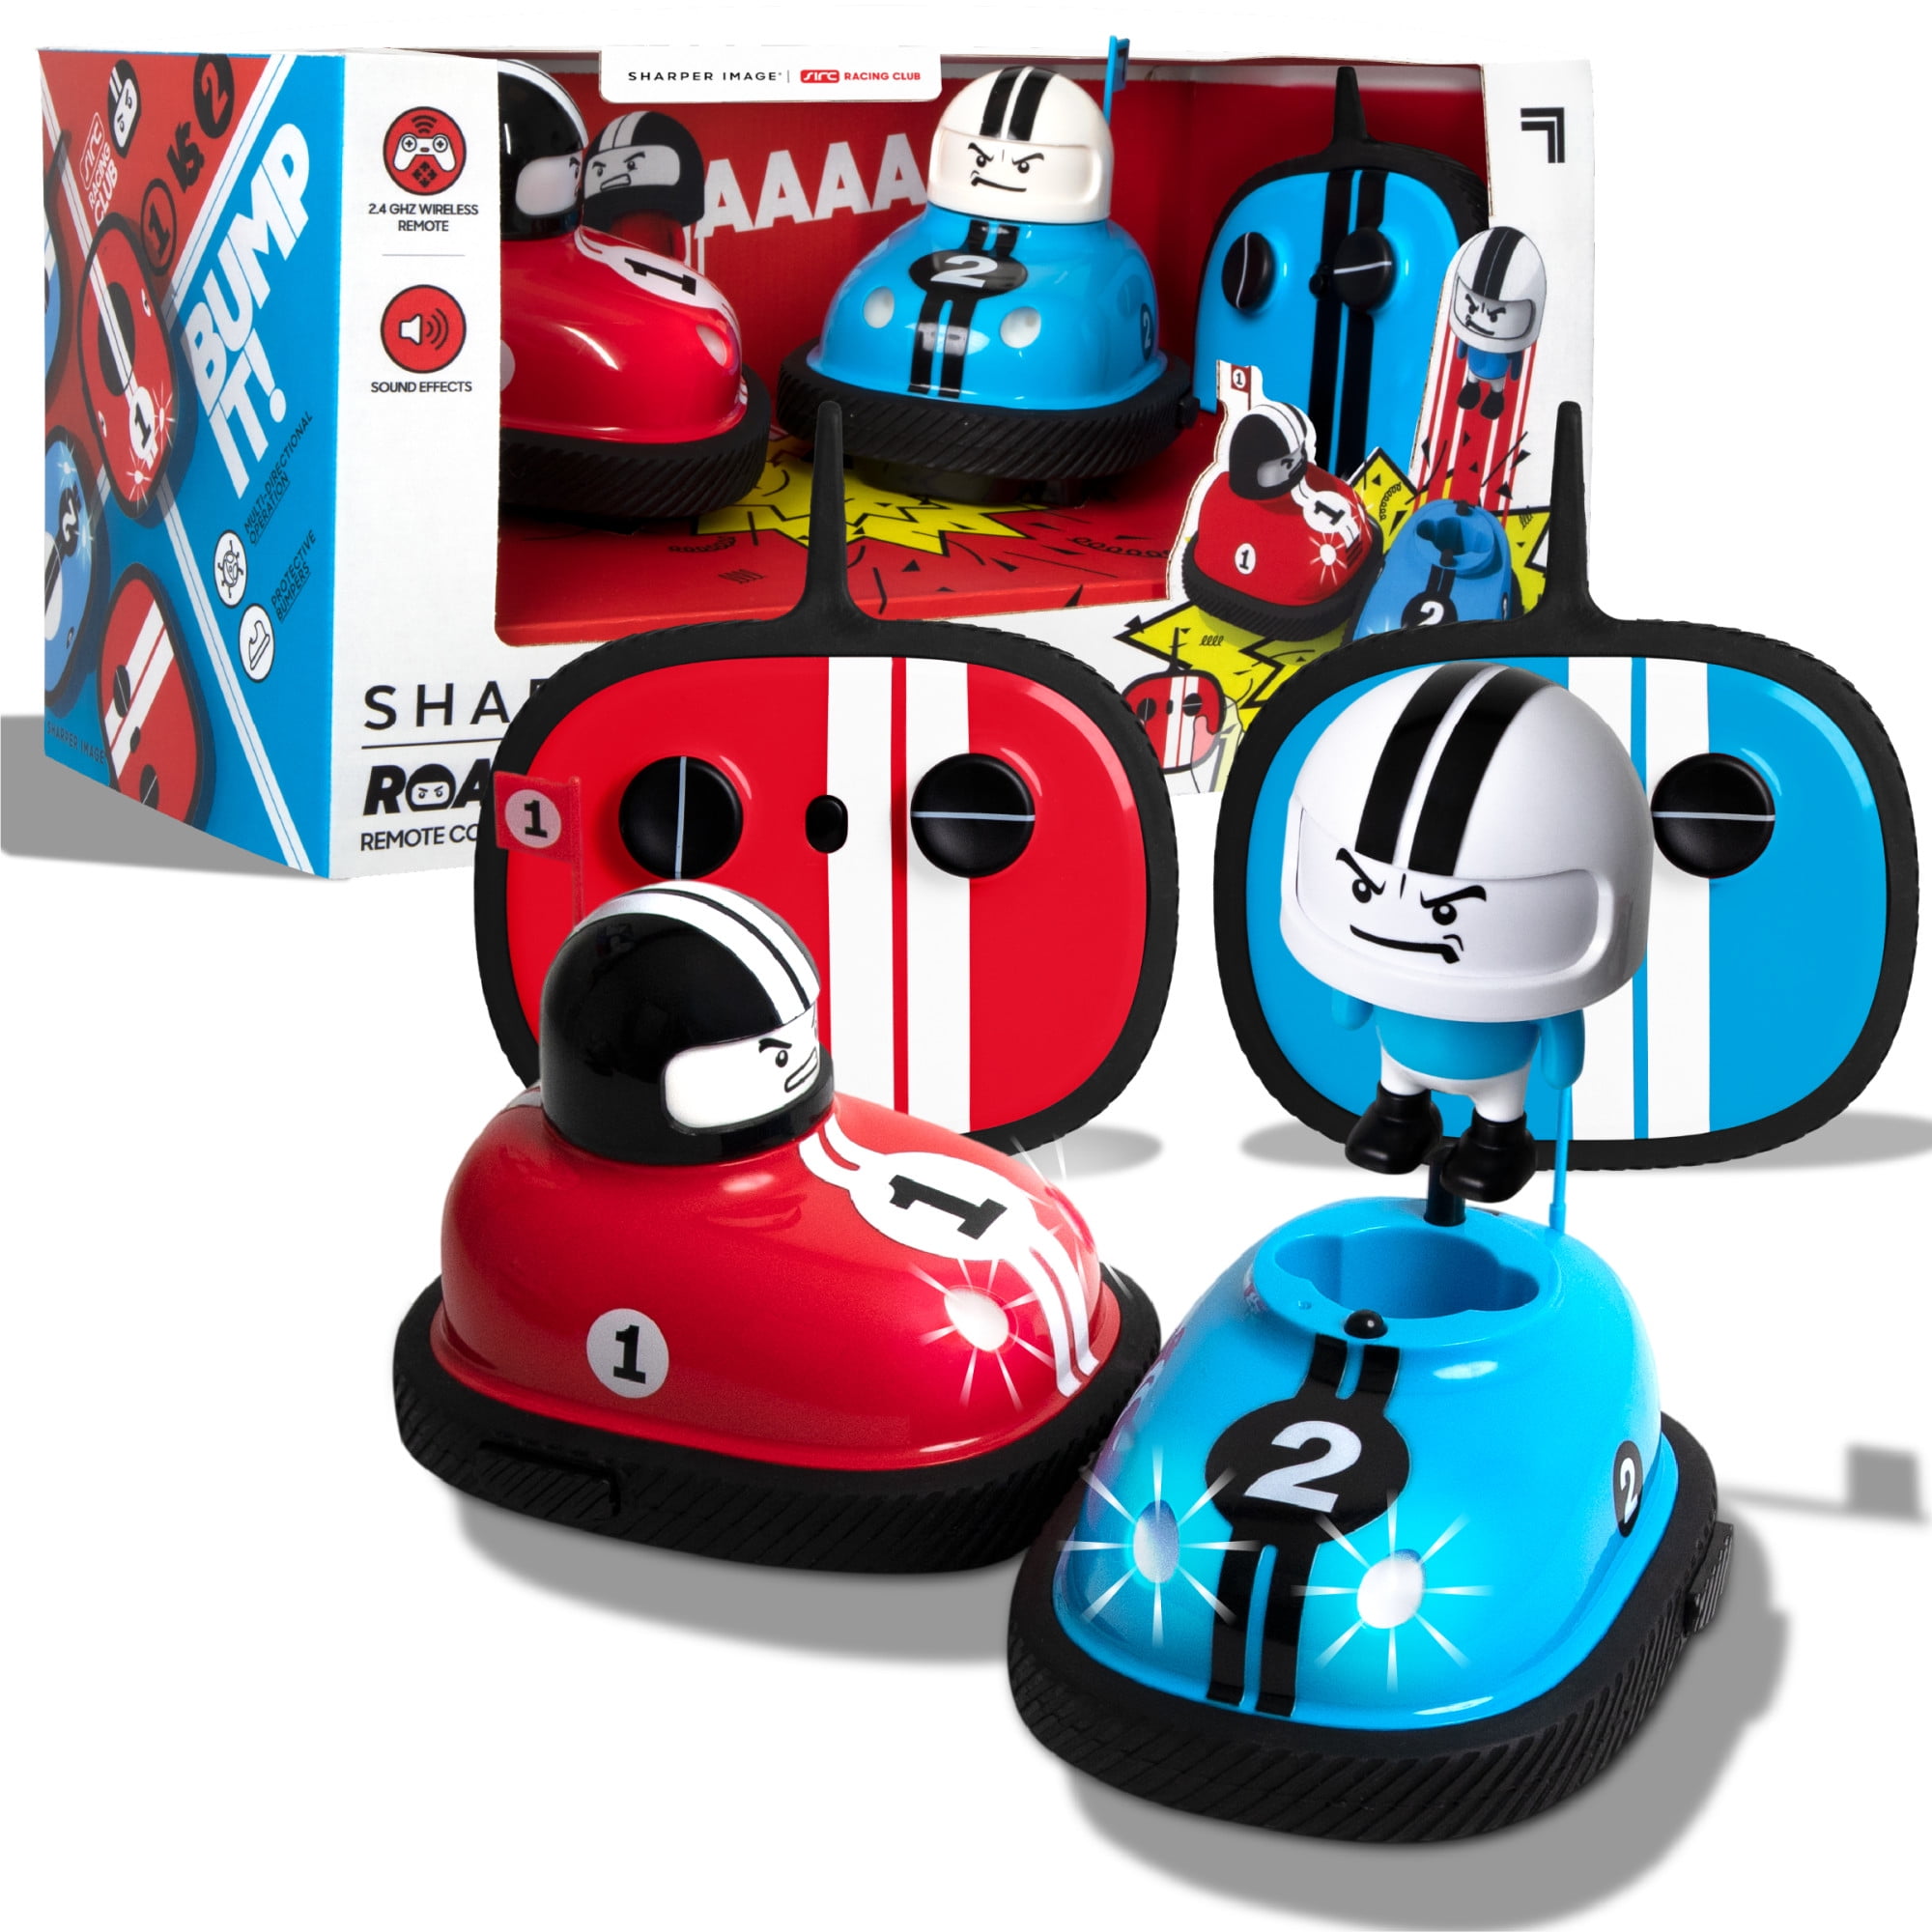 Sharper Image Road Rage RC Speed Bumper Cars, Mini Remote Controlled Ejector Vehicles, 2 Player Head to Head Battle, Crash into Opponents, 2.4 GHz, Red and Blue, Ages 6 and Up